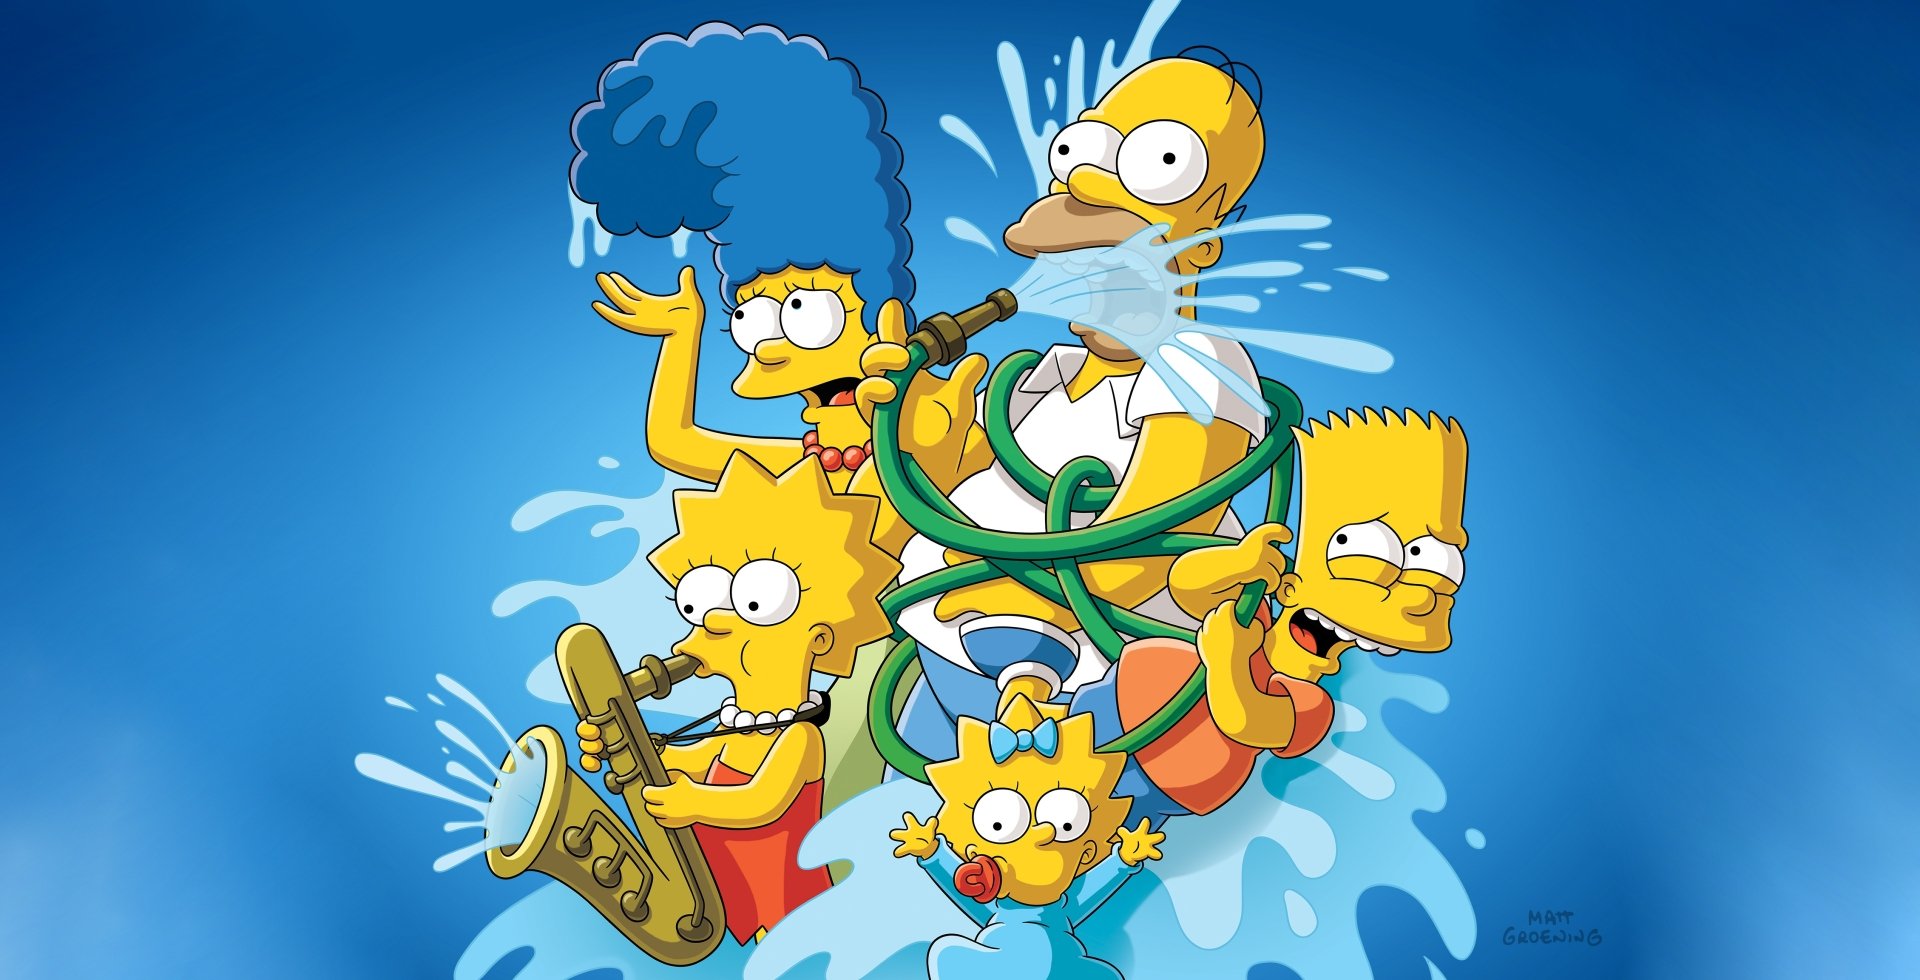 Bart Simpson Wallpaper for mobile phone tablet desktop computer and other  devices HD and   Cartoon wallpaper Simpson wallpaper iphone Cartoon  wallpaper iphone